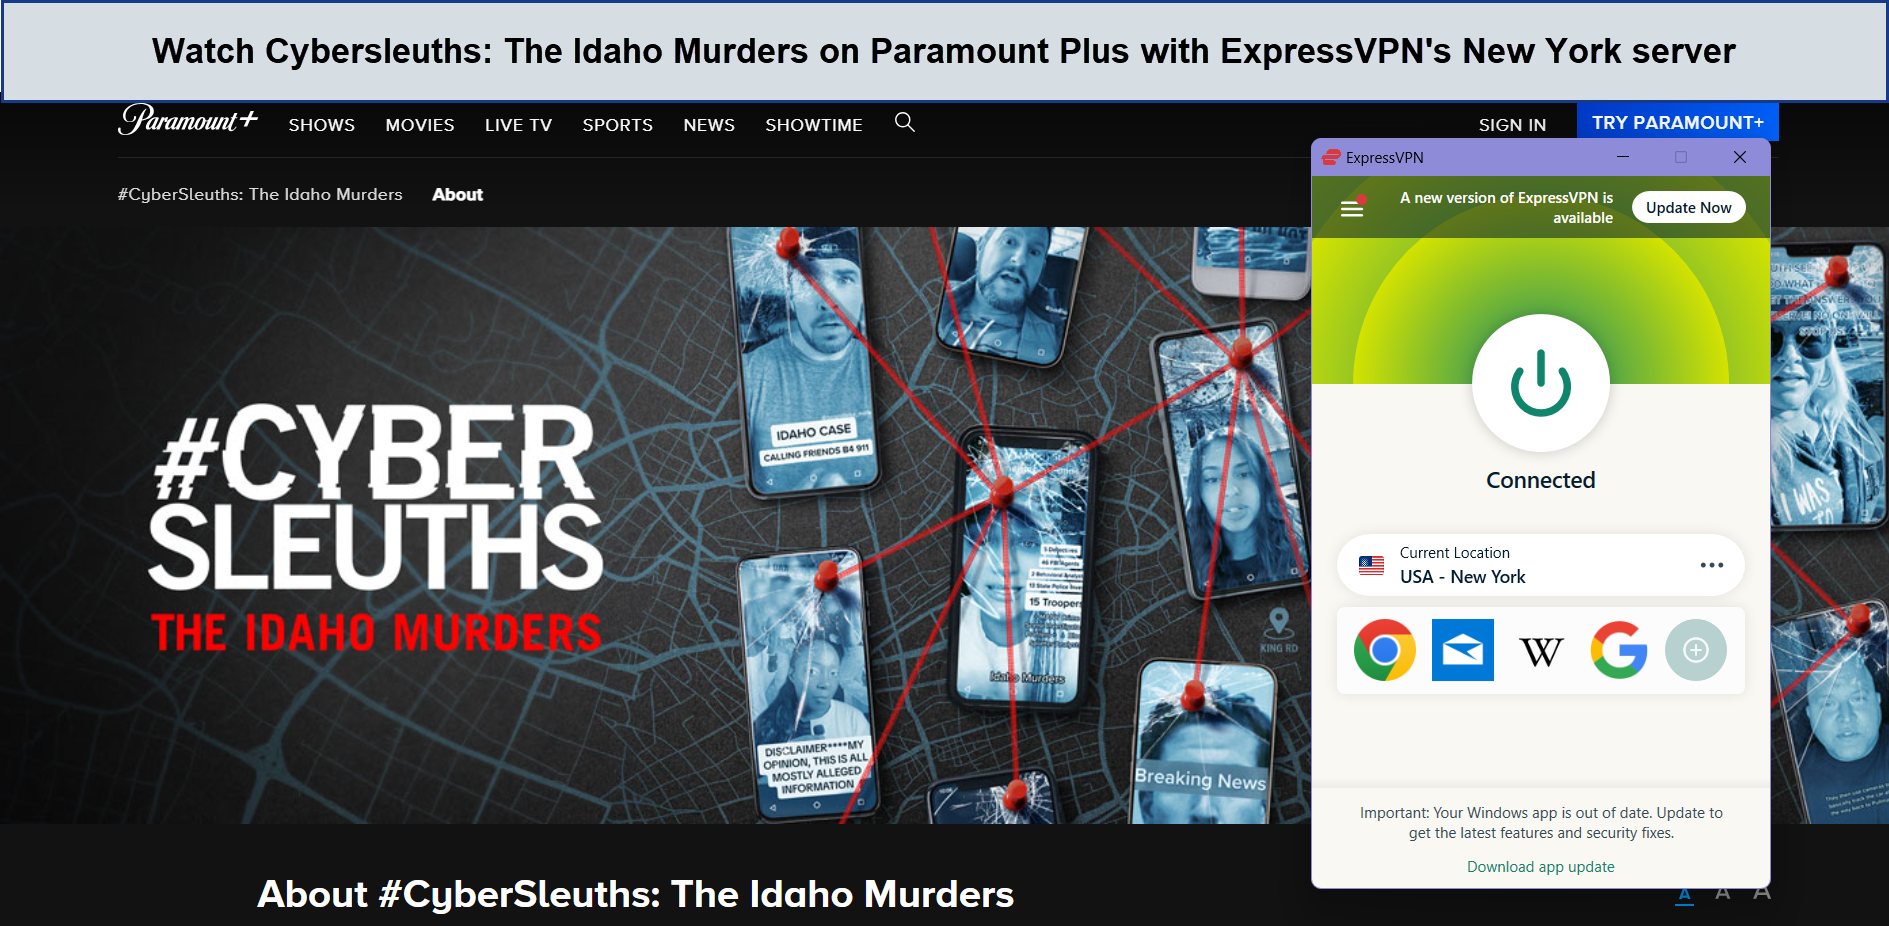 Watch-Cybersleuths-The-Idaho-Murders-on-Paramount-Plus-with-ExpressVPN-outside-USA